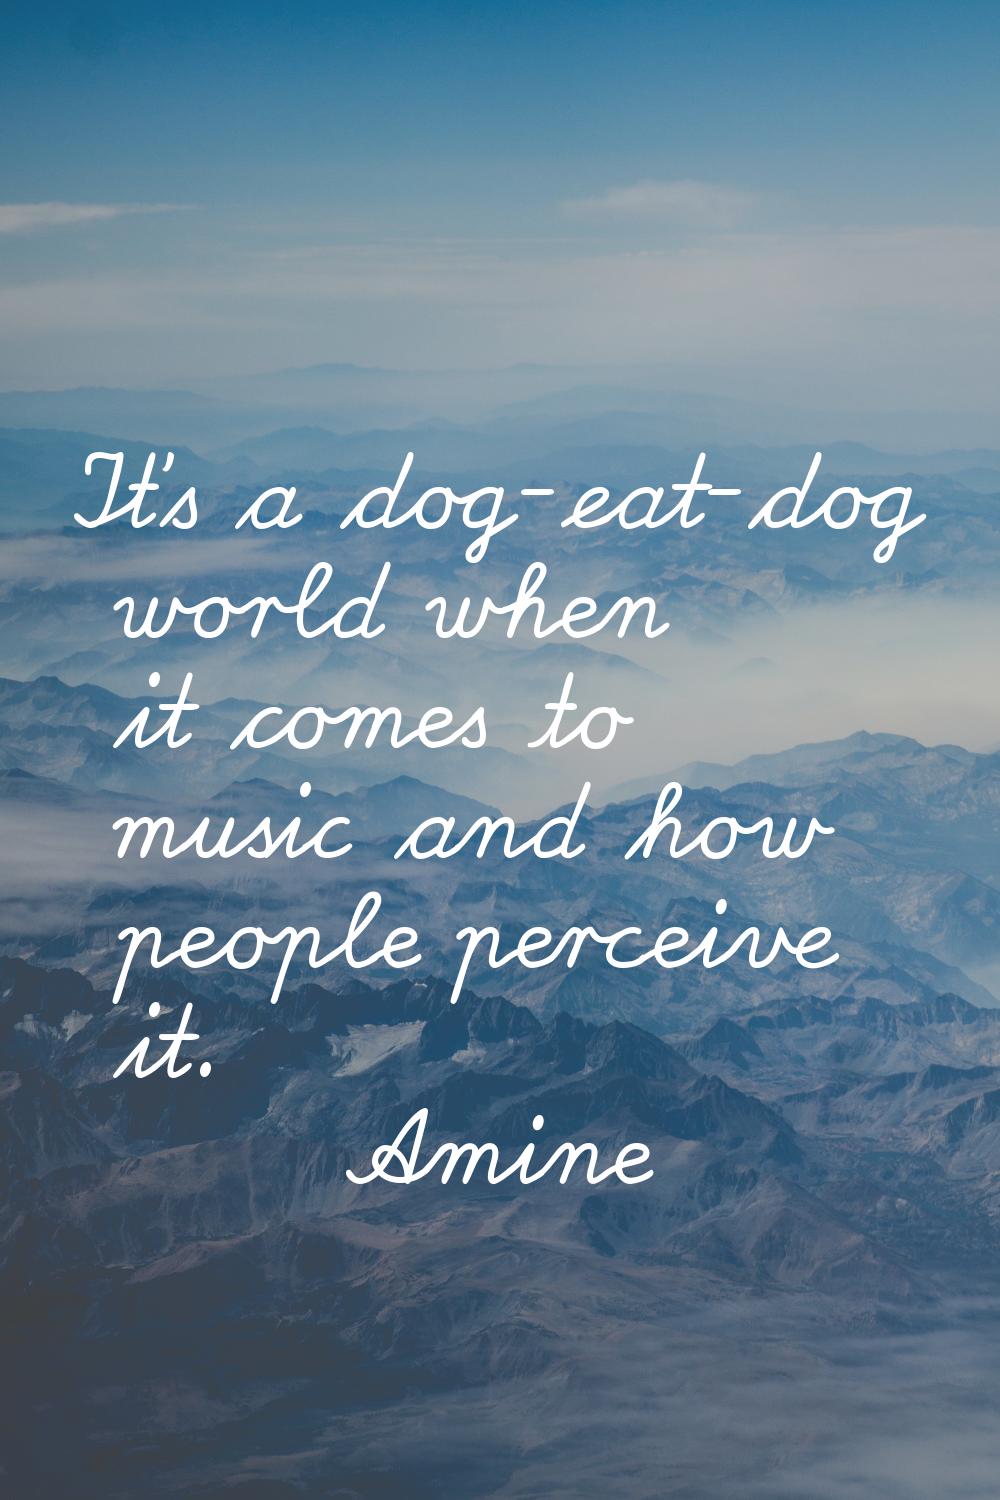 It's a dog-eat-dog world when it comes to music and how people perceive it.